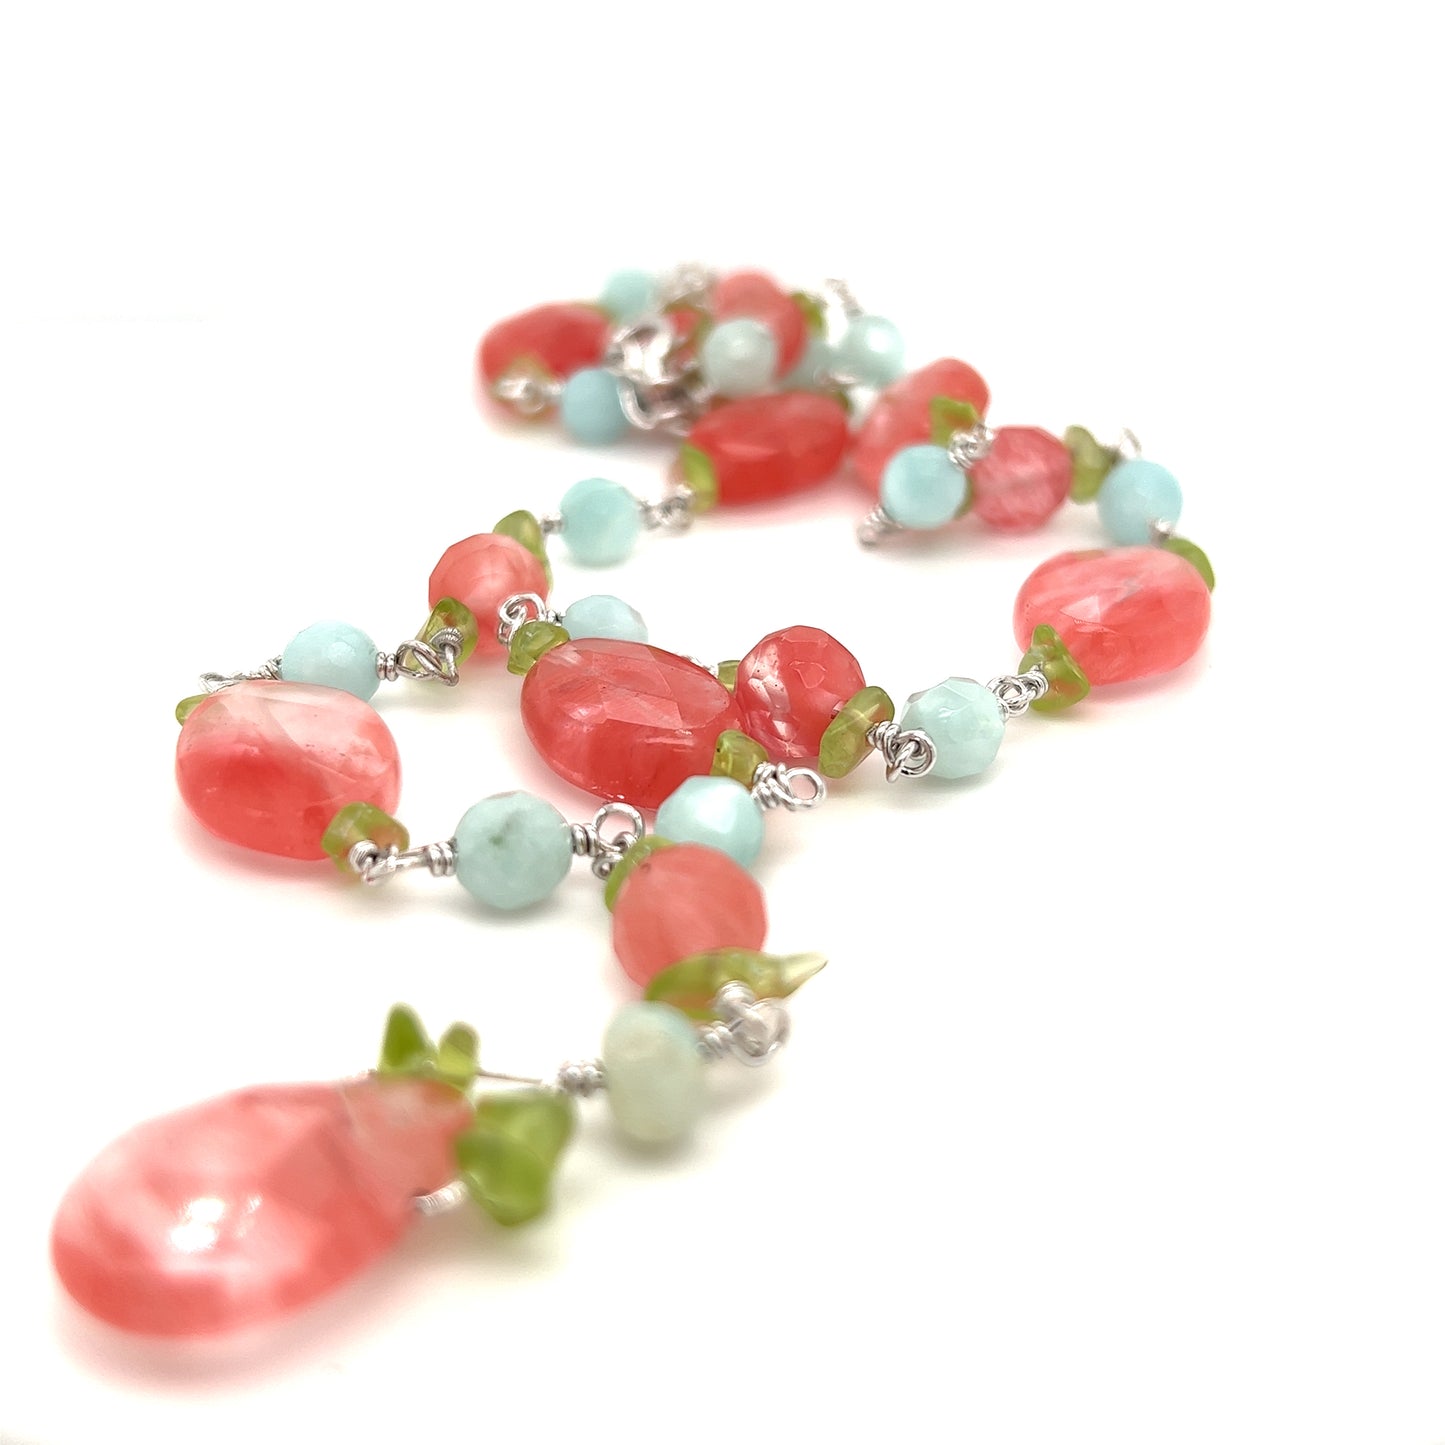 A Super Silver Beaded Multicolor Y-necklace with coral and turquoise beads.